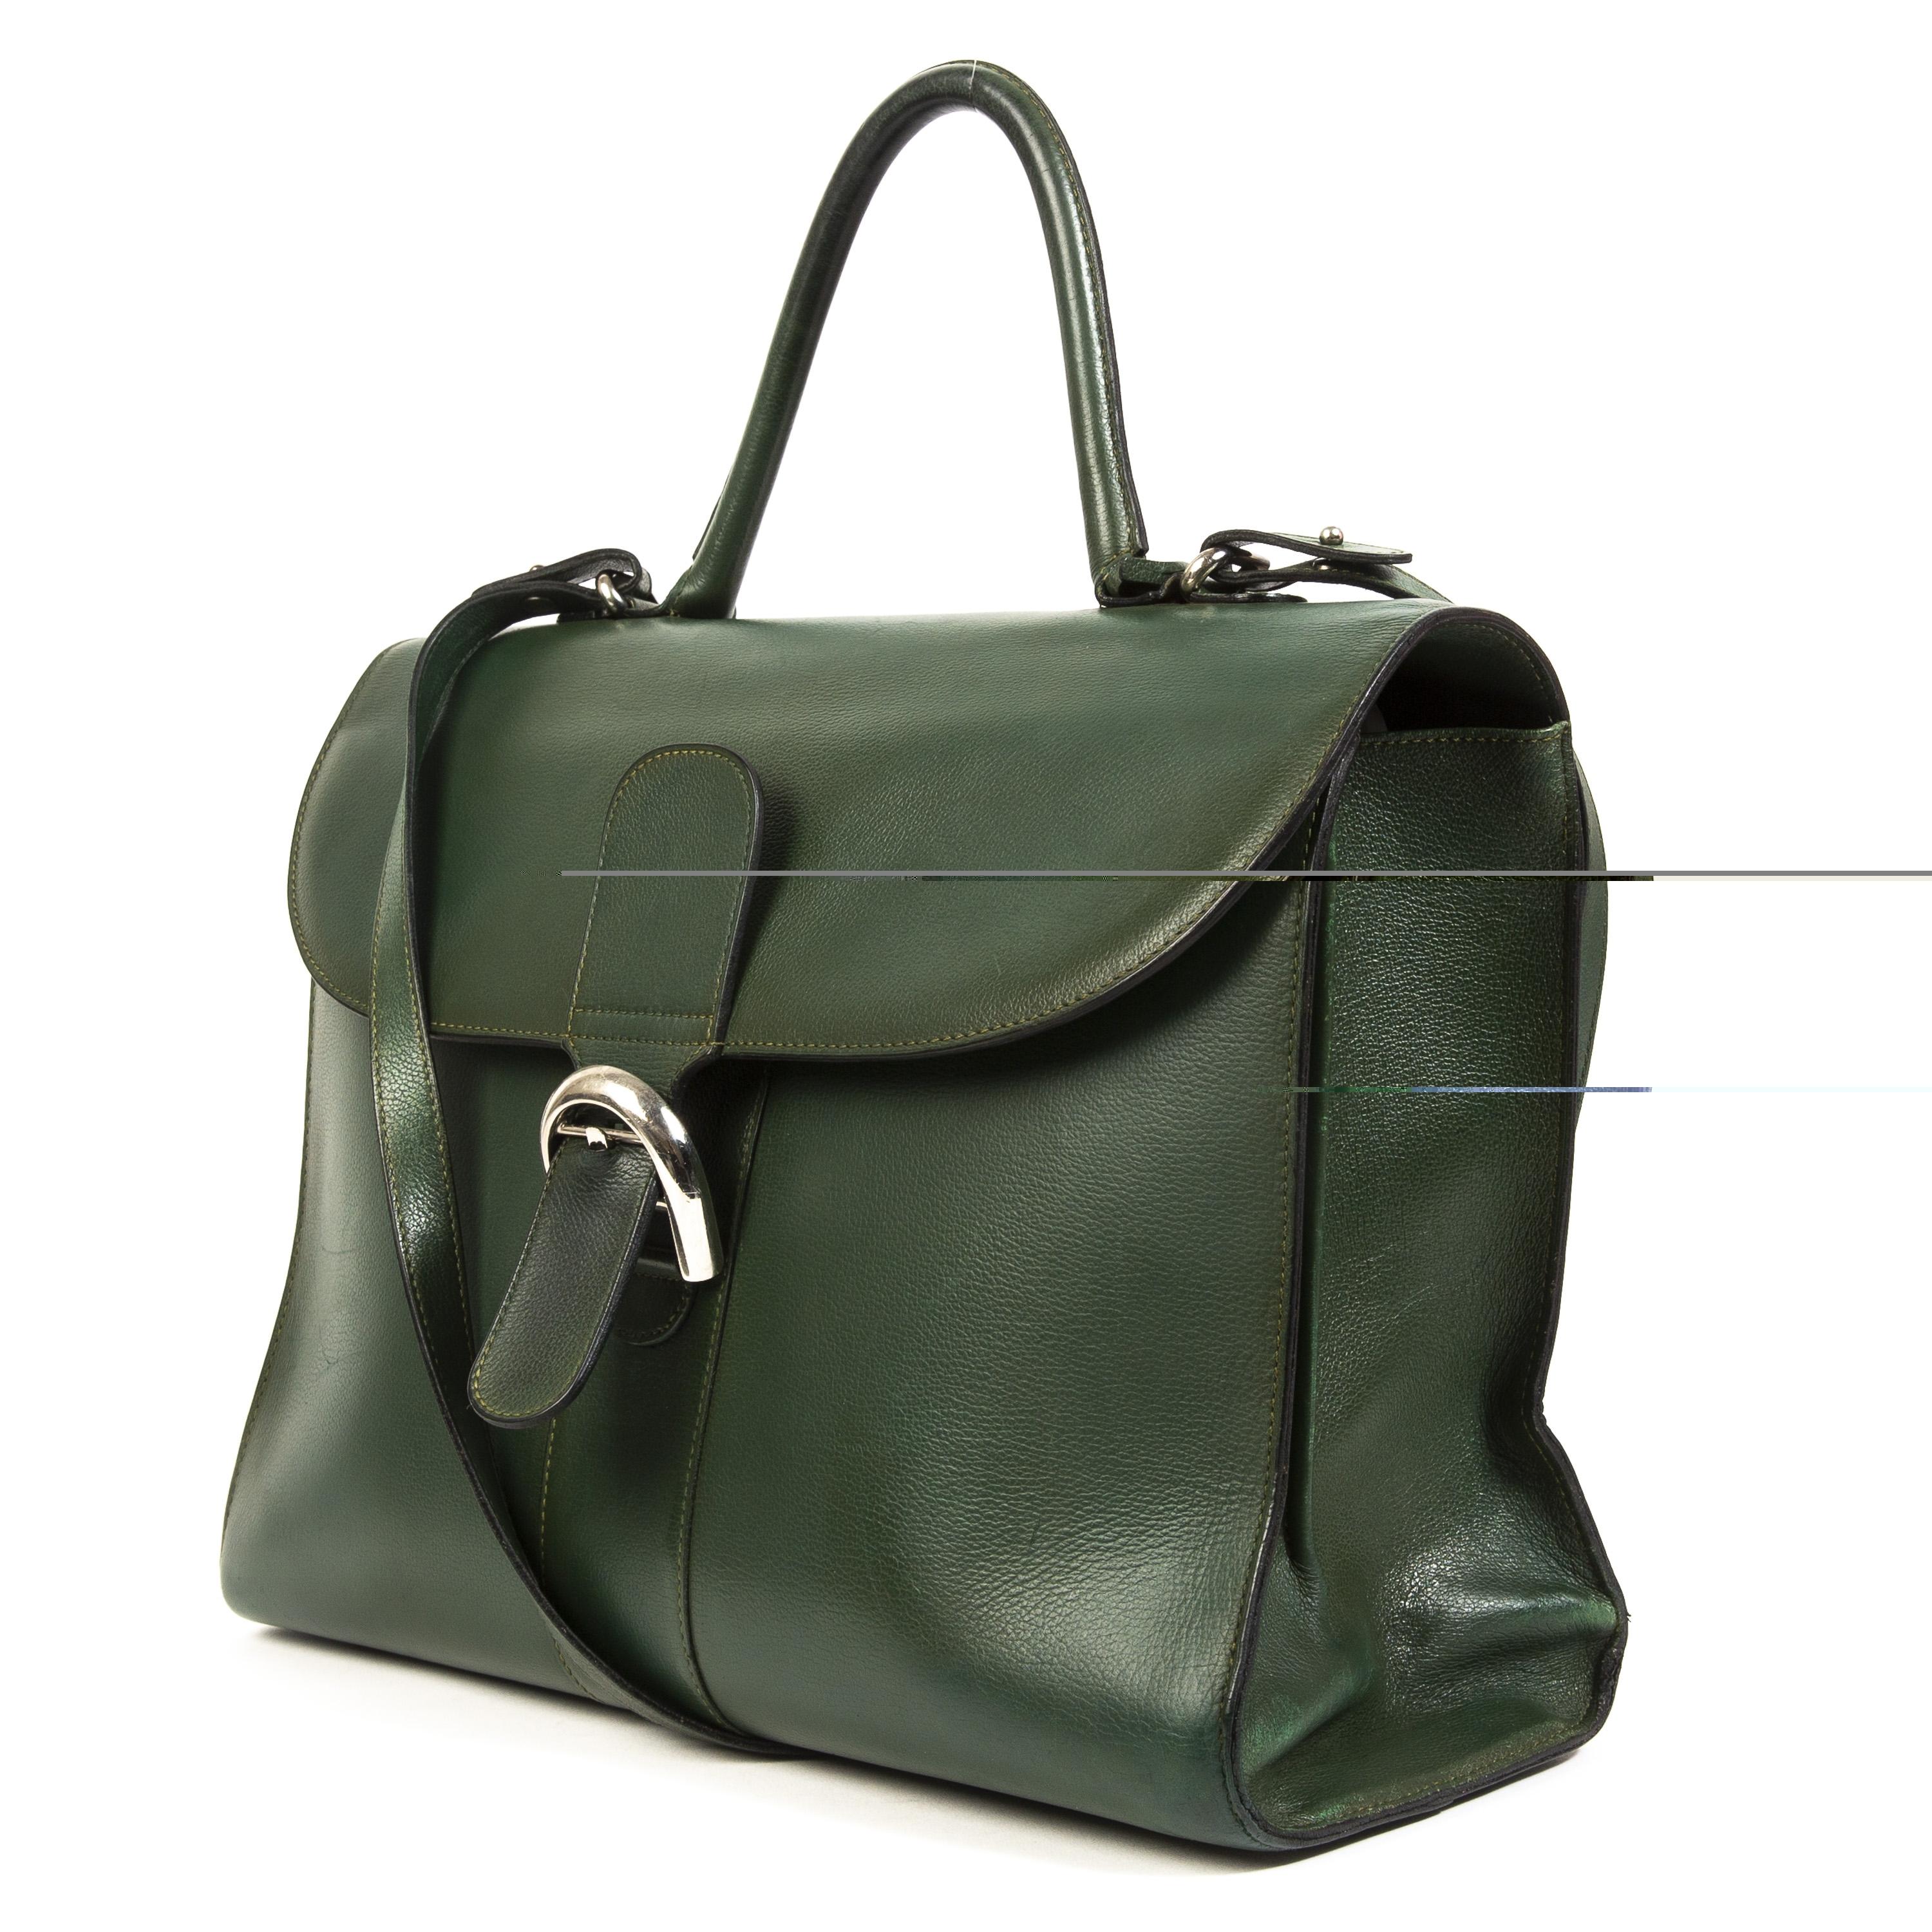 Very good preloved condition

Delvaux Green Brillant GM + Strap 

What a beauty! The green leather makes sure that the silver-toned hardware pops! 

This is the perfect bag for daily use. There's anough space to store all your essentials.  

The